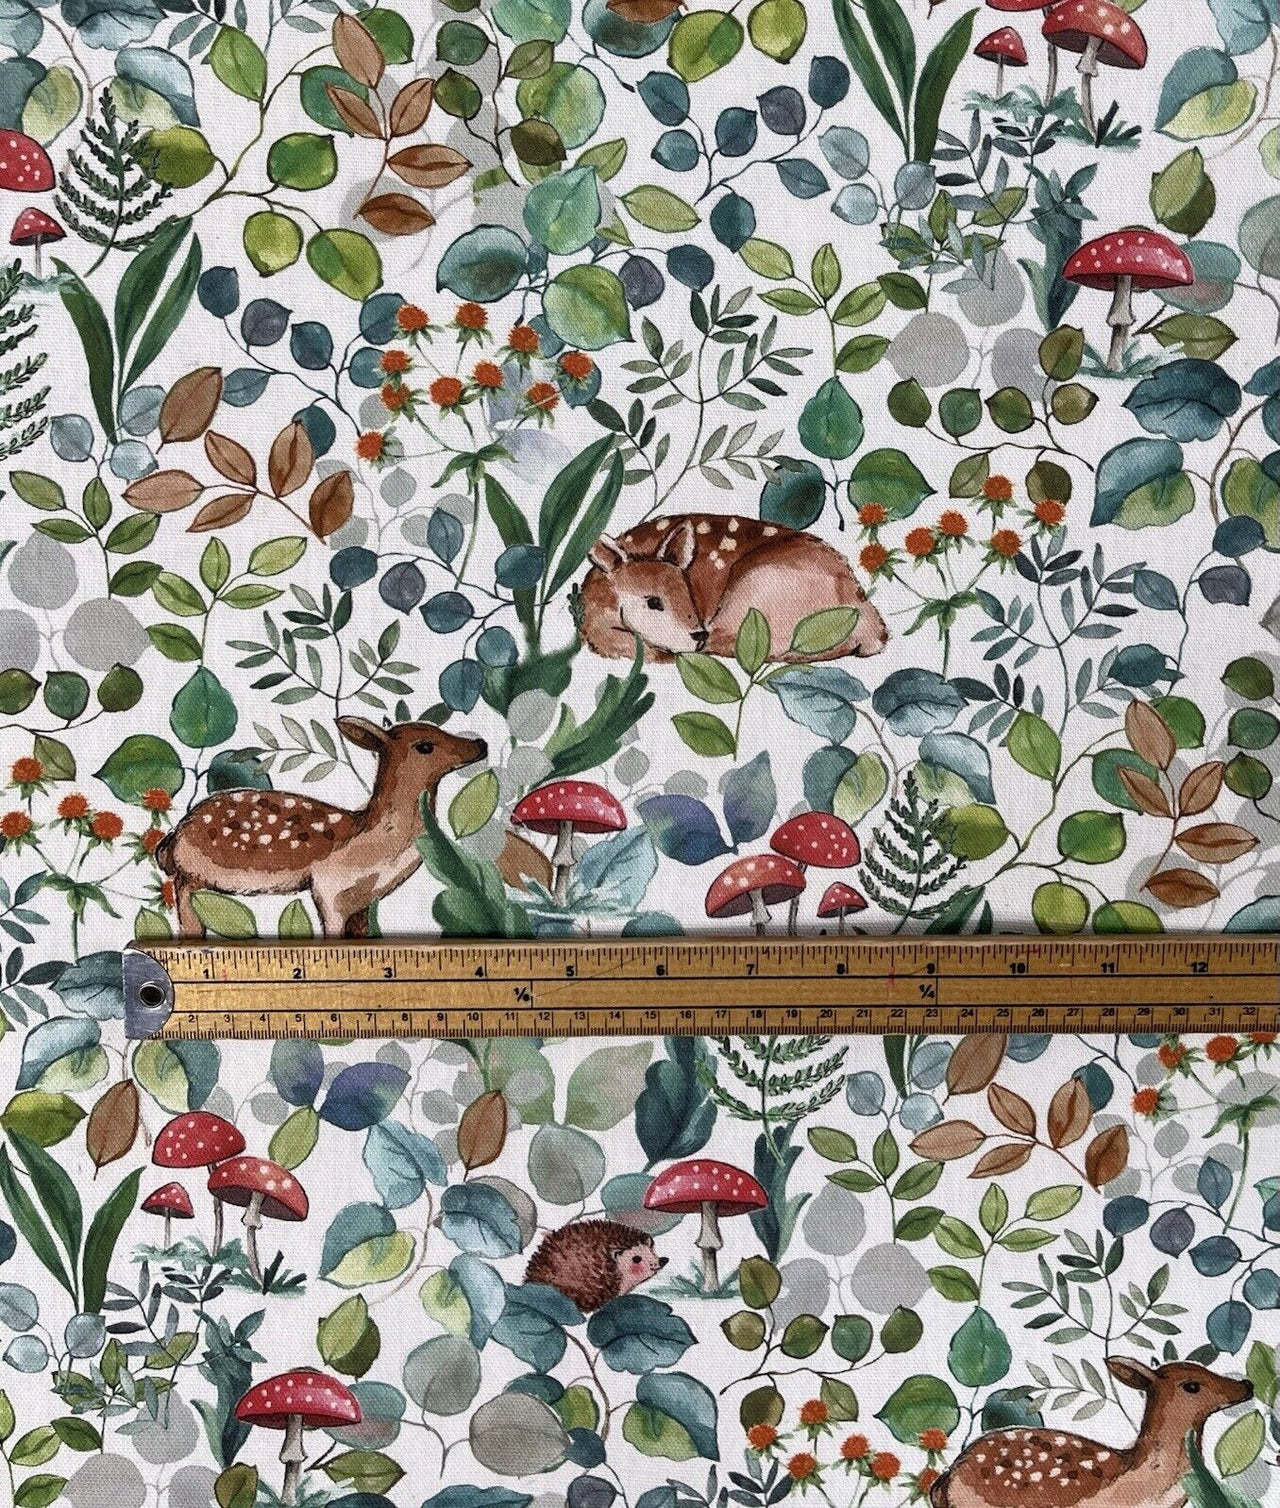 Enchanting Forest Friends: Bambi and Deer Cotton Fabric - Perfect for Botanical Design in Kids' Bedroom Sewing Projects